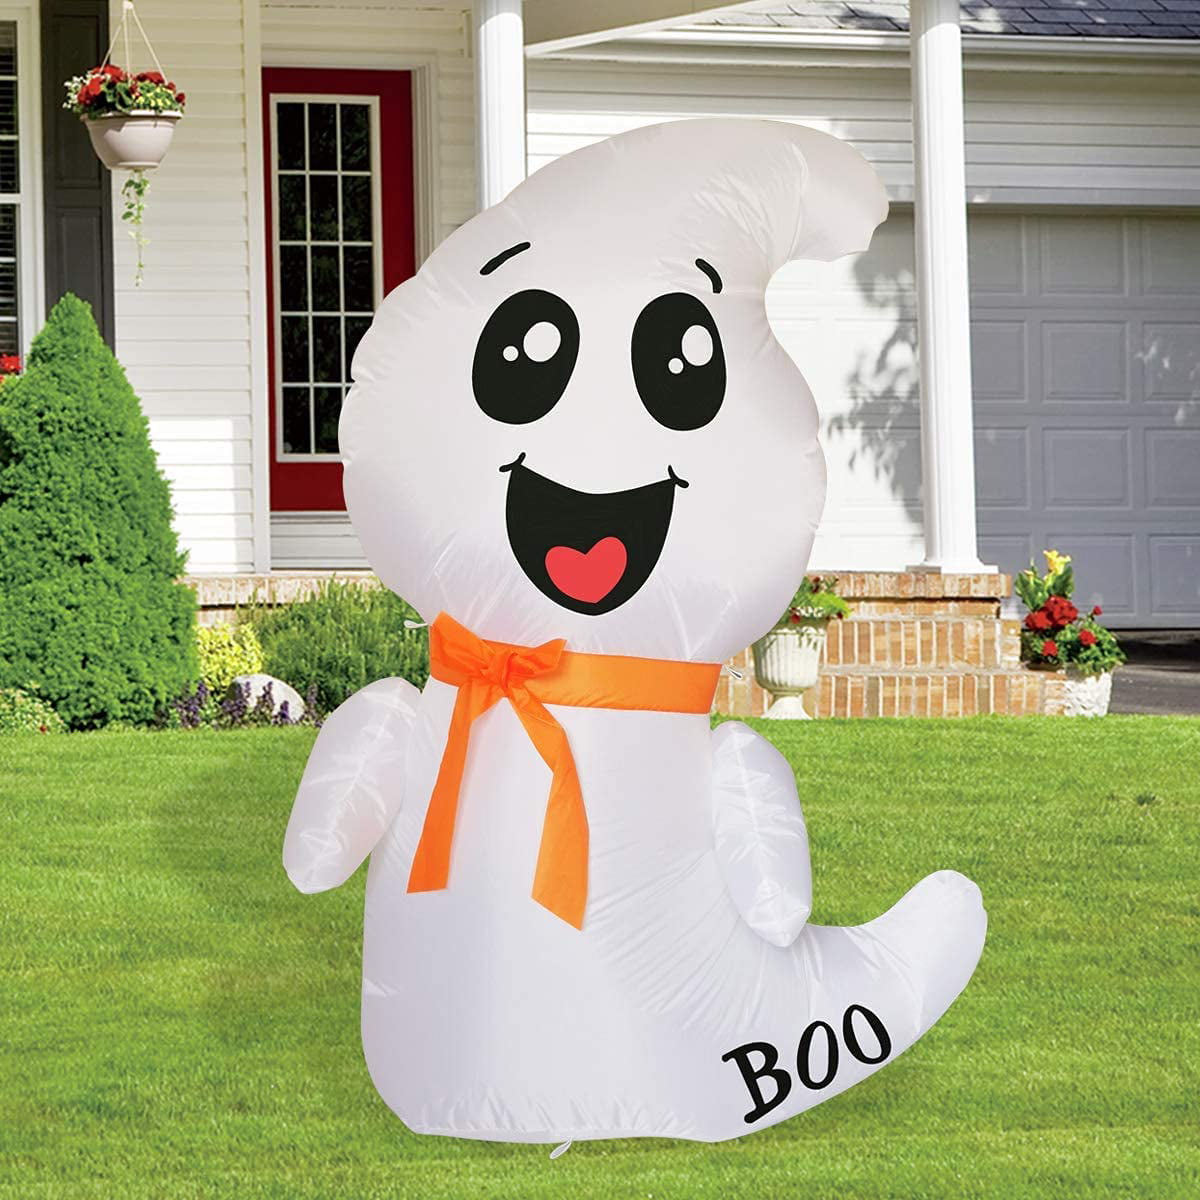 Yard Lawn Garden Spooky Ghost with Built-in Flame Effect Lights,Blow Up Halloween Decoration for Party Indoor Outdoor Joycabin 8 FT Halloween Inflatable Ghost 